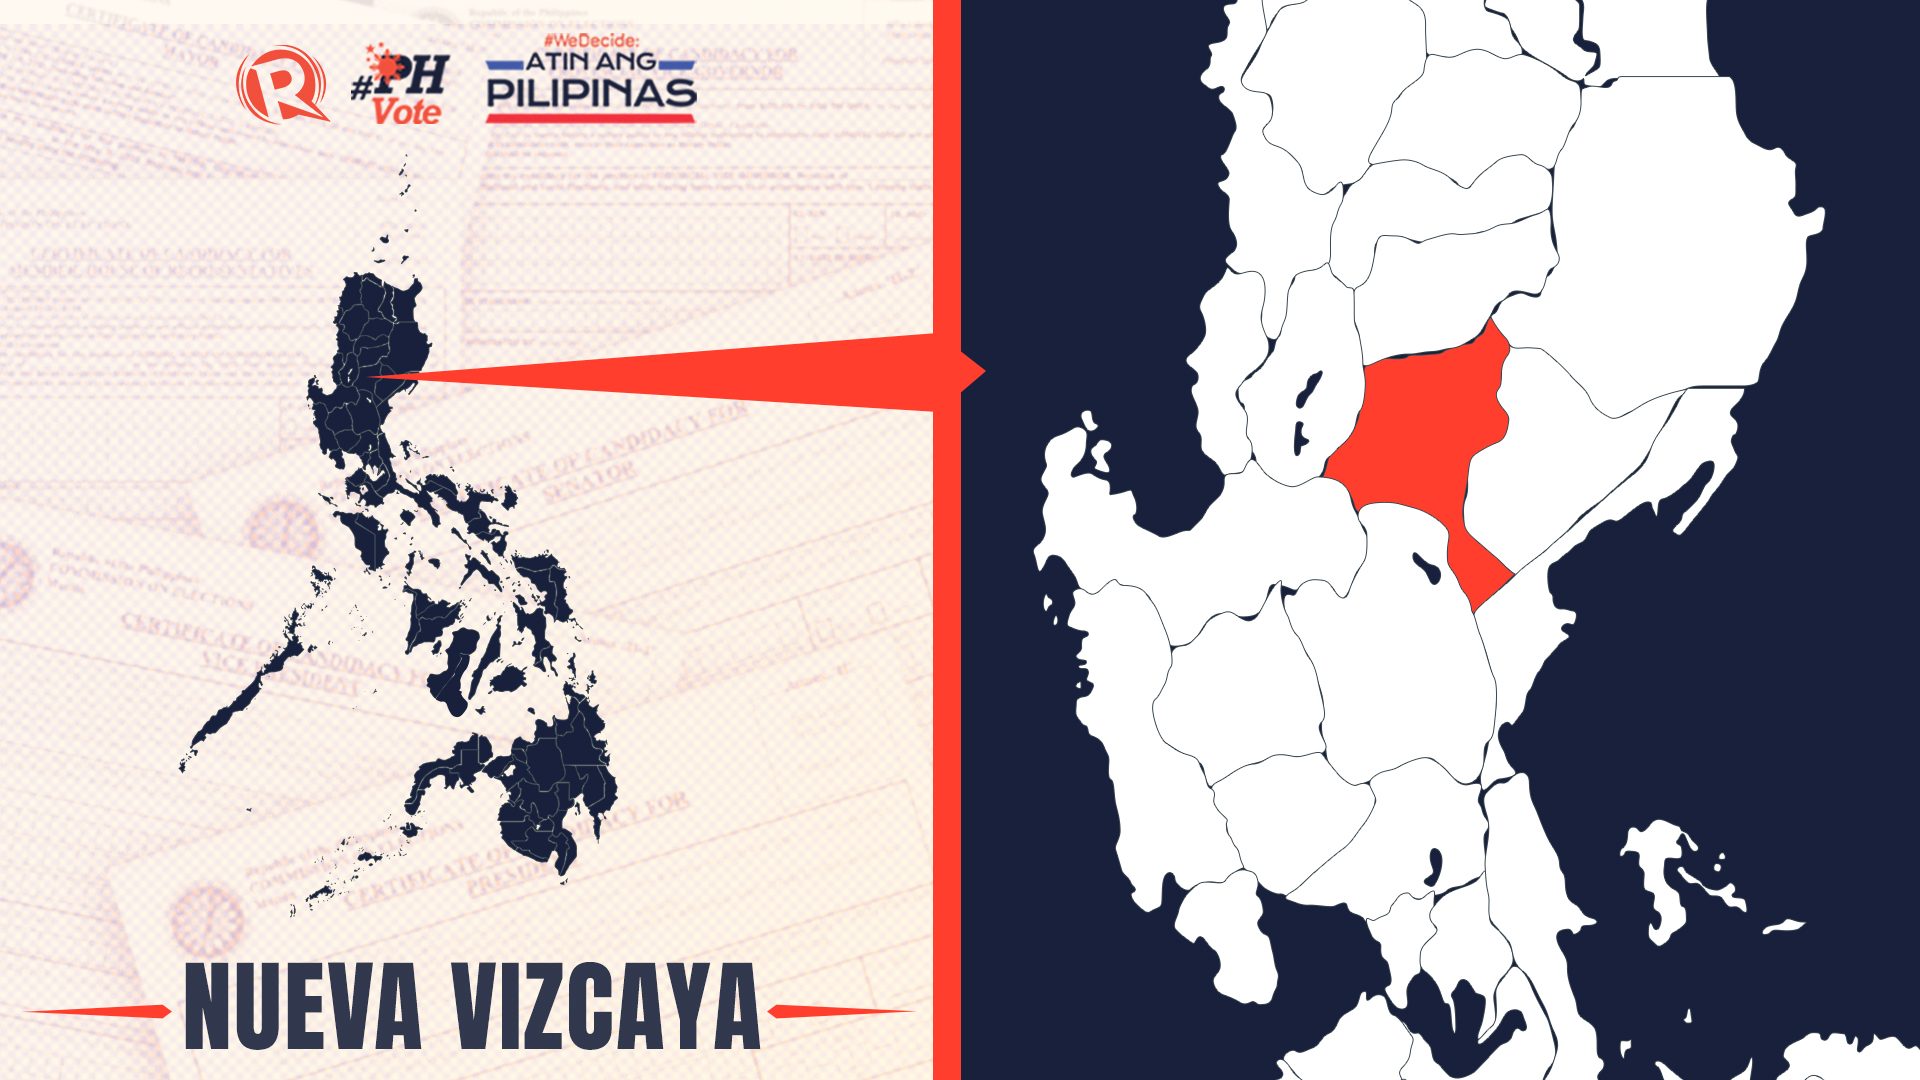 LIST: Who is running in Nueva Vizcaya in the 2022 Philippine elections?